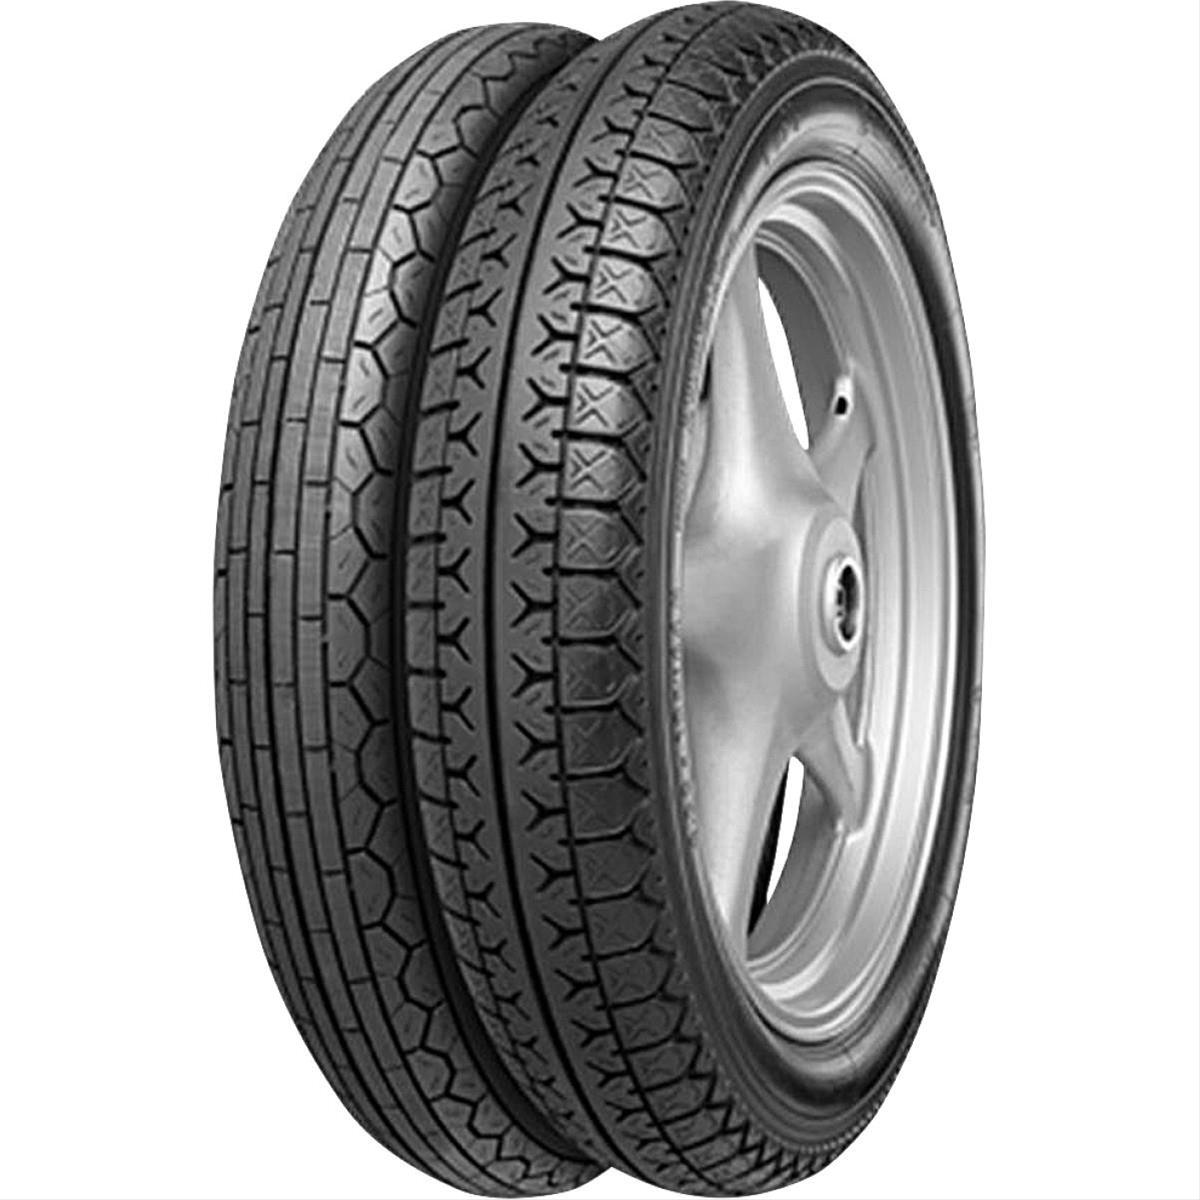 continental-motorcycle-tires-02481150000-continental-tire